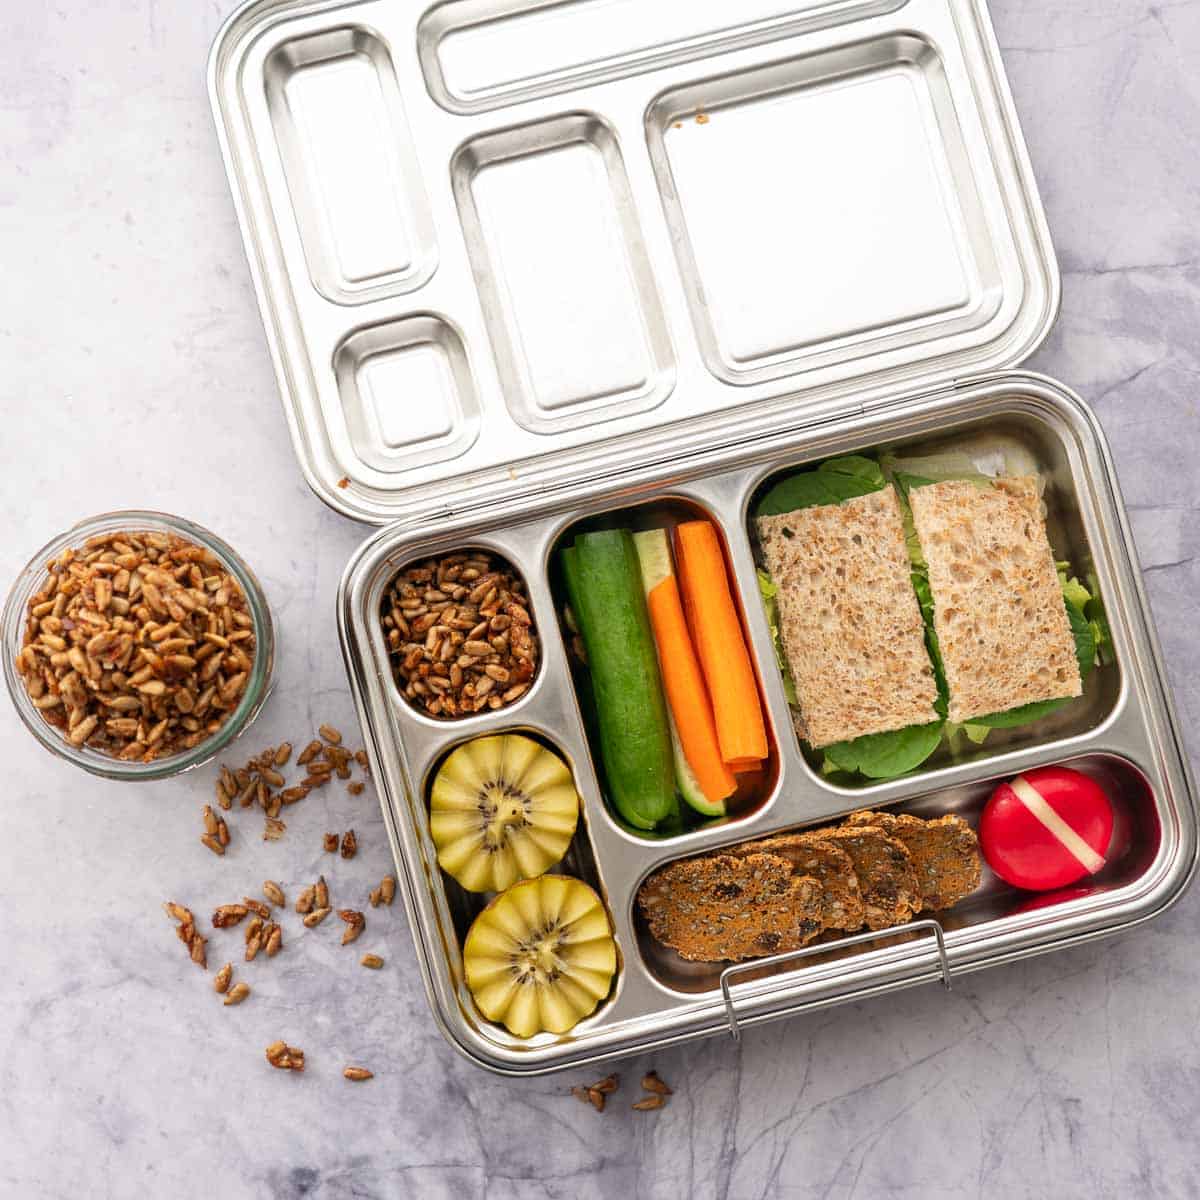 A stainless steal lunch box filled with the roasted seeds along with a kiwifruit, cucumber and carrot slides, cheese round and crackers and a brown bread sandwich.